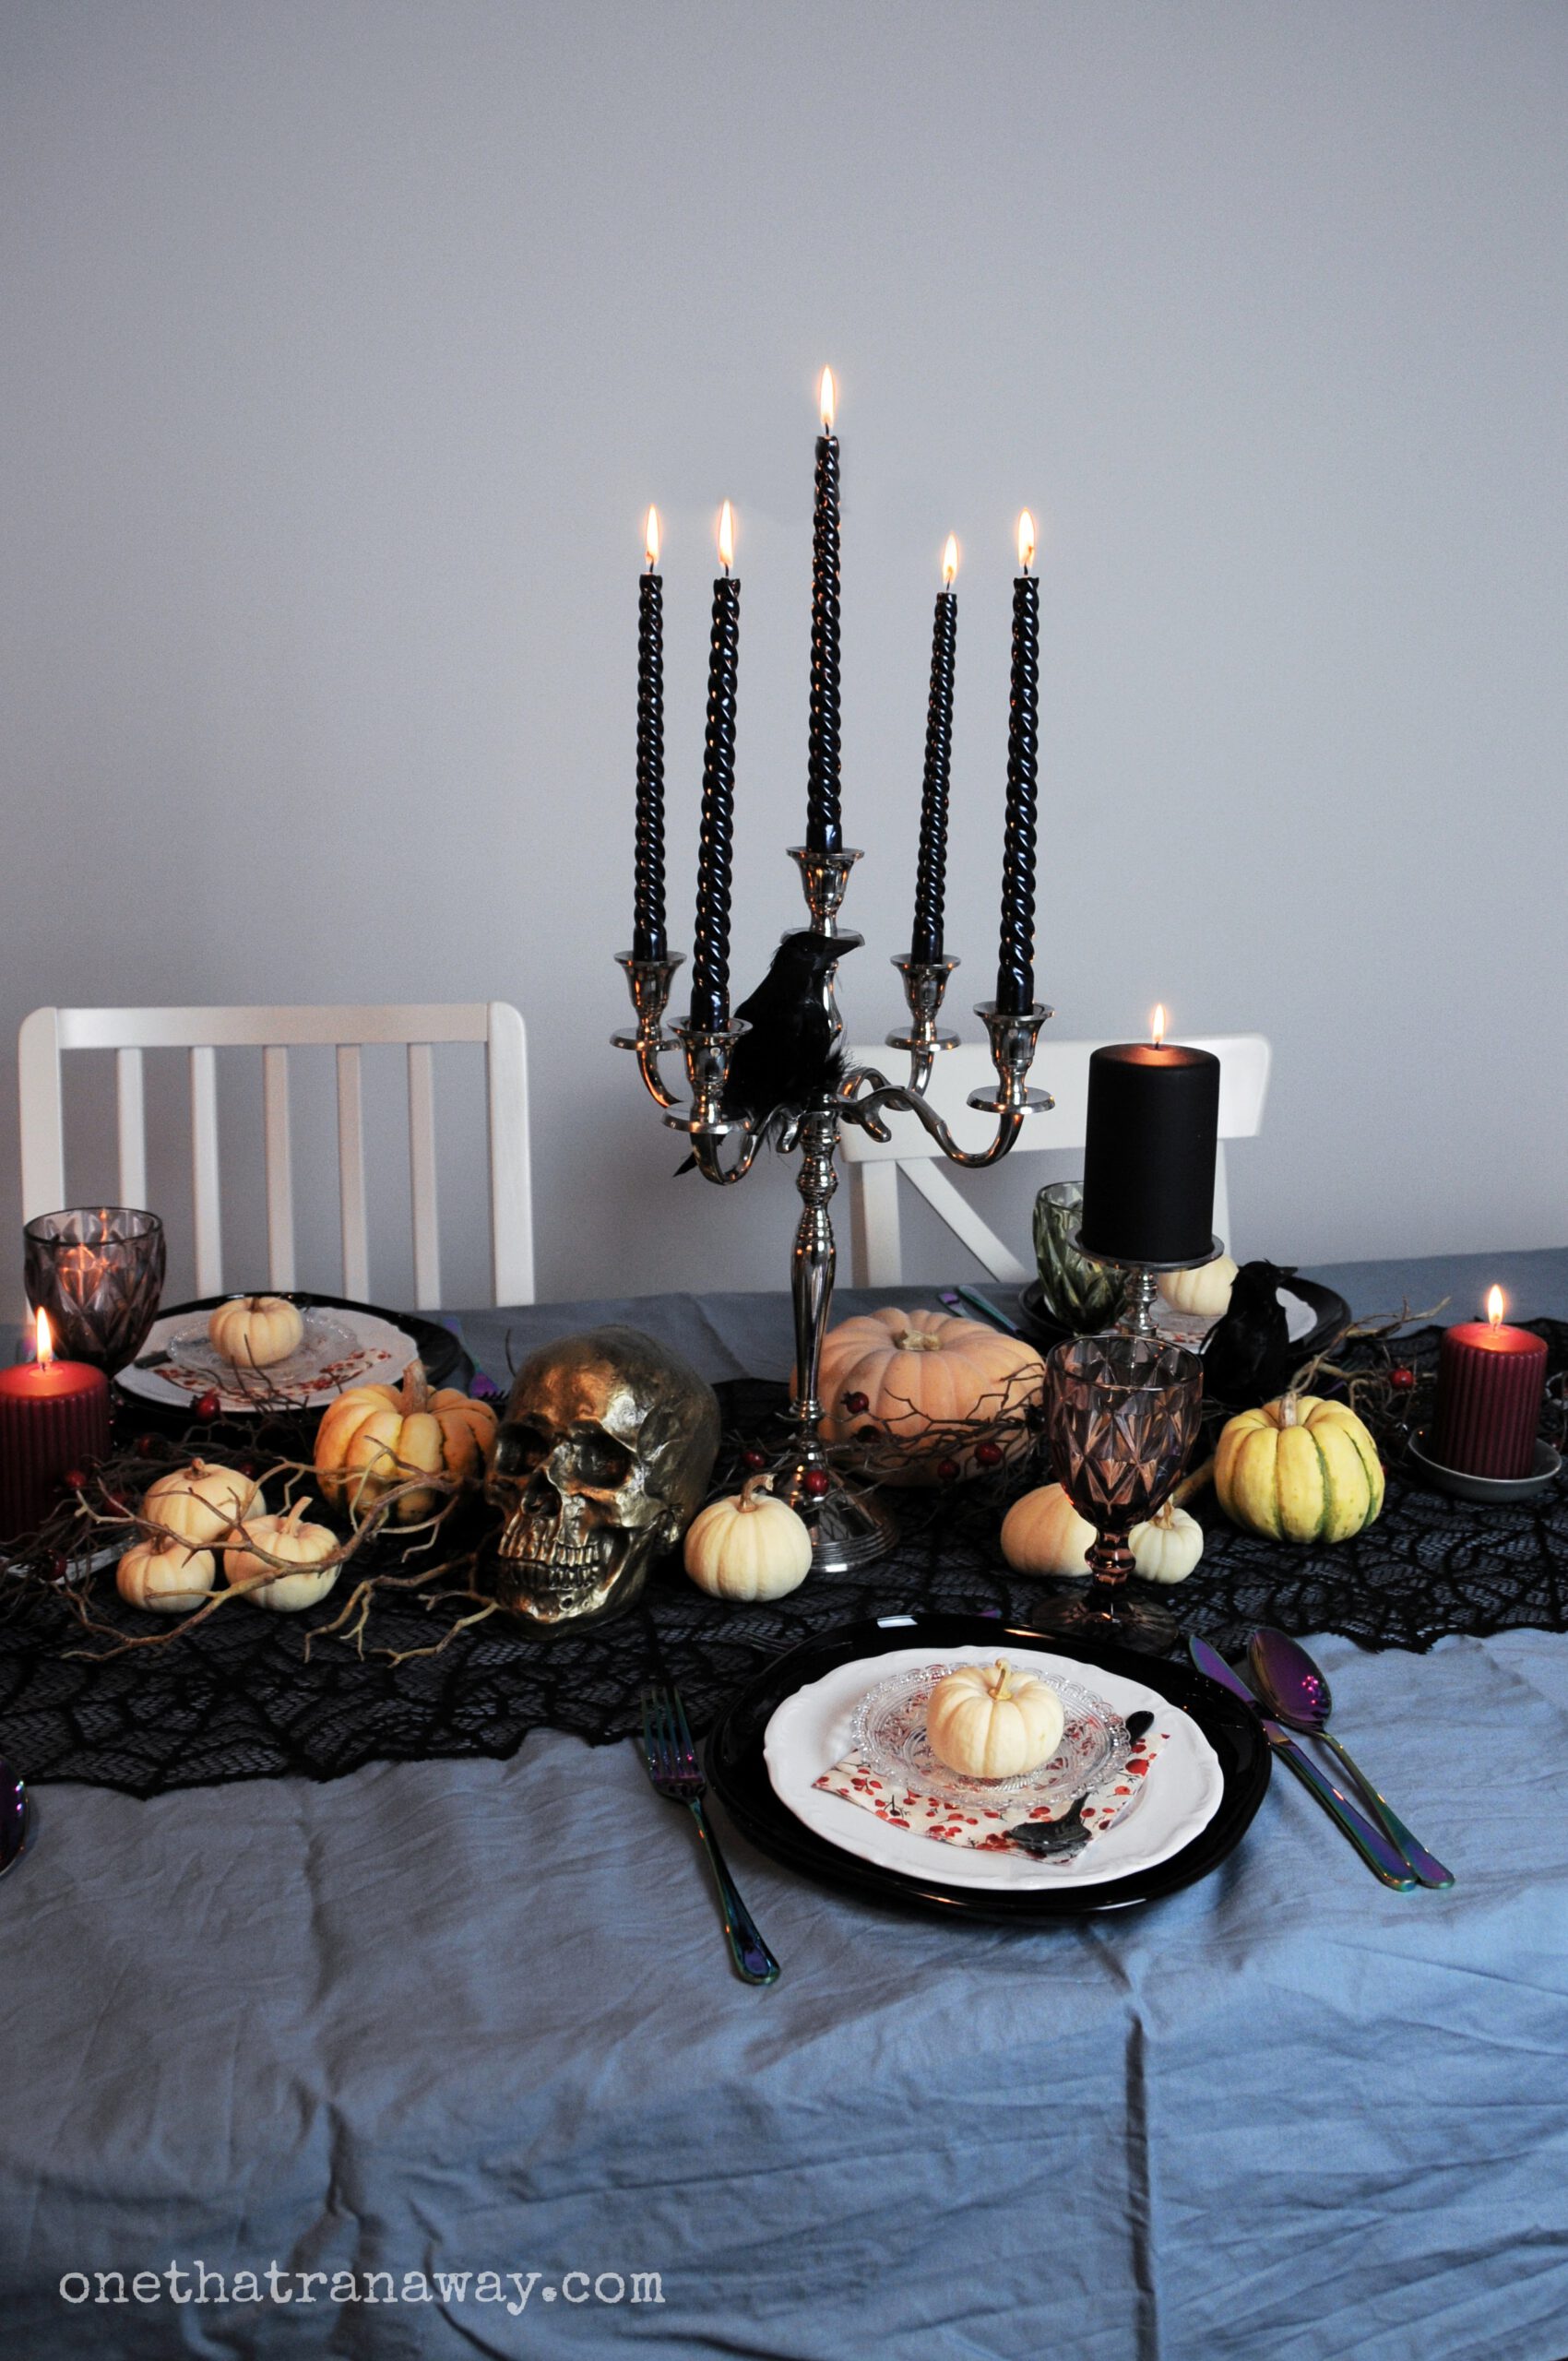 tablescape for a spooky elegant Halloween dinner party with black candles, a black spider web table runner and different pumpkins for decoration